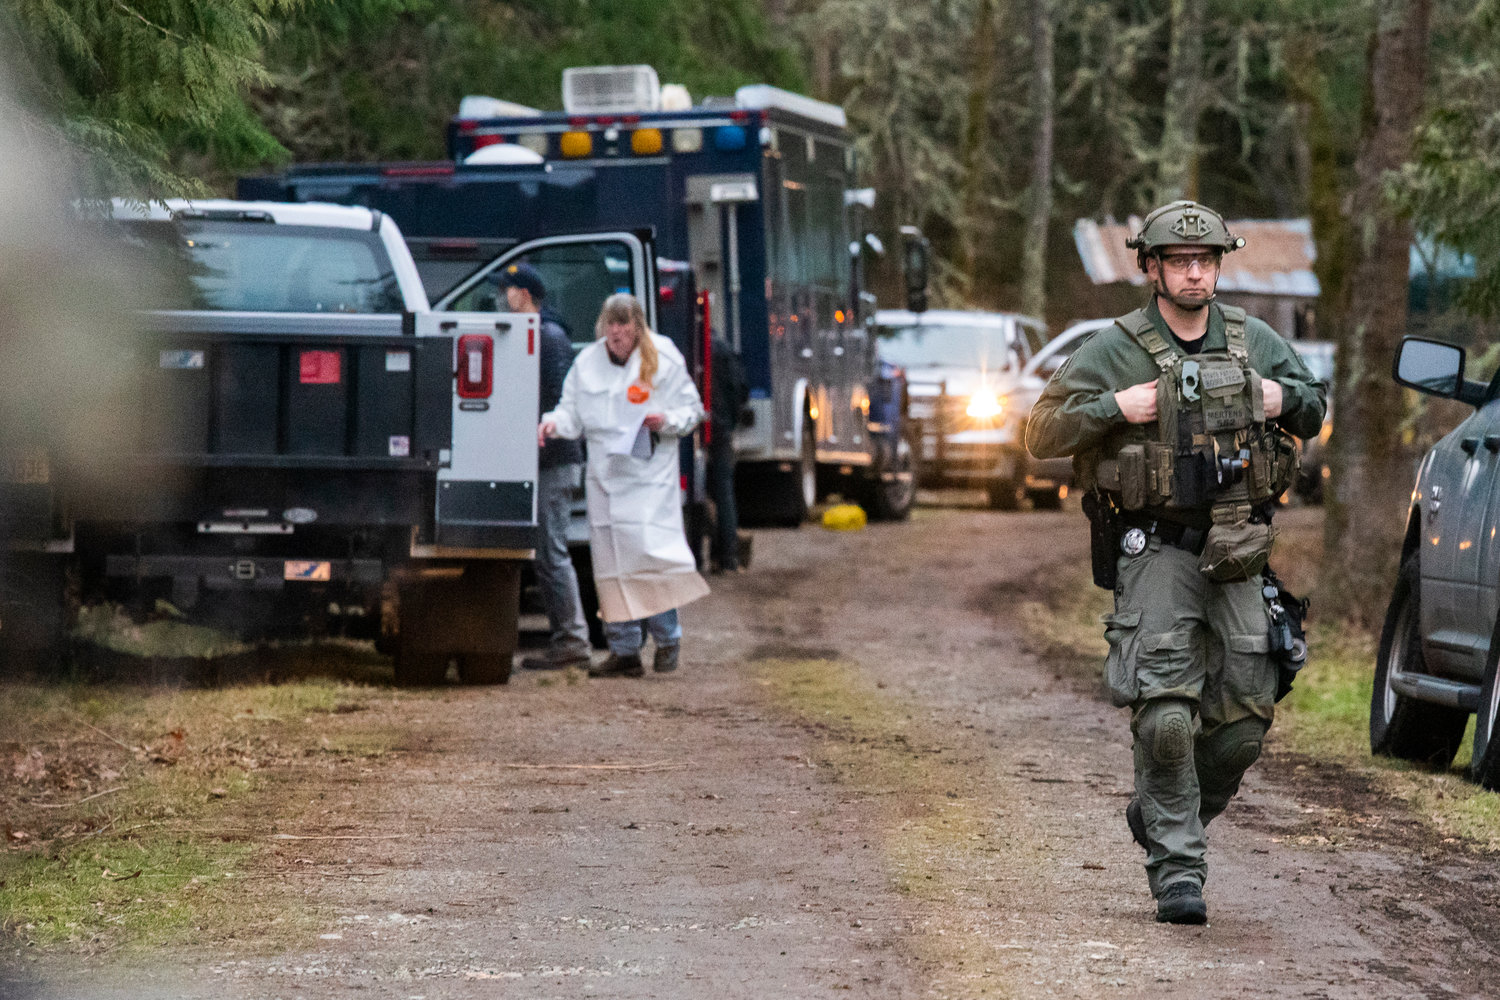 Ecology Hazmat crews work to remove non-active materials from the 20000 block of Neat Road Southeast as bomb techs detonate potentially dangerous materials Tuesday afternoon in Yelm.